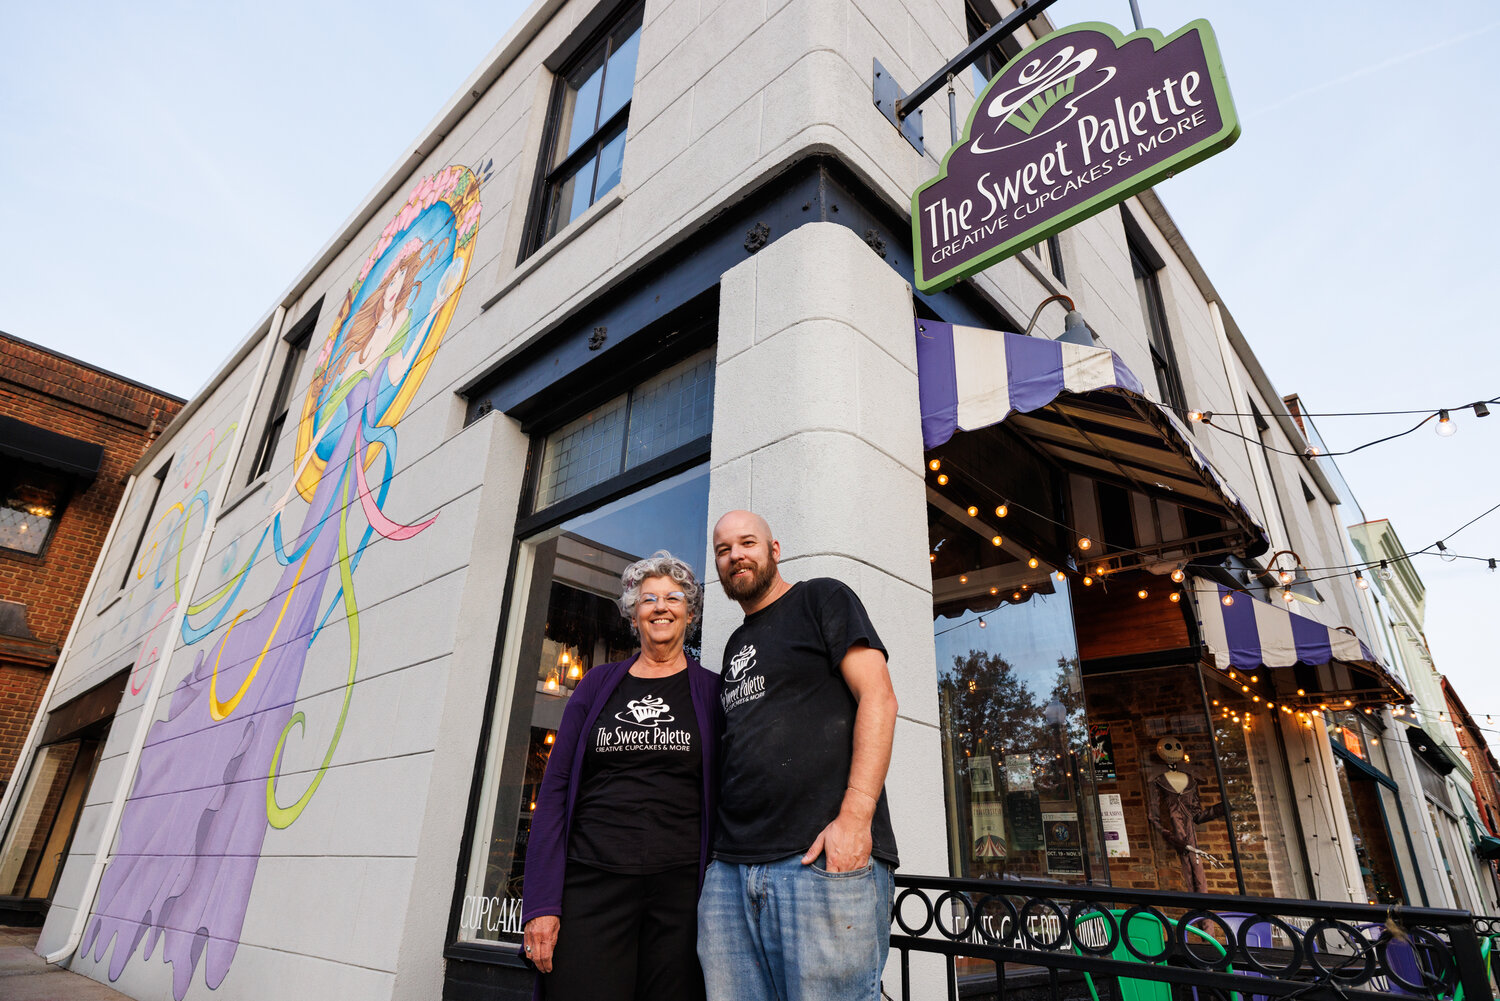 In October and November 2023, Patsy Crawford and her son Adam Crawford added their artistic touch to the downtown atmosphere by painting a mural on the side of The Sweet Palette bakery. Patsy hopes the mural will draw more visitors to businesses on Person Street.